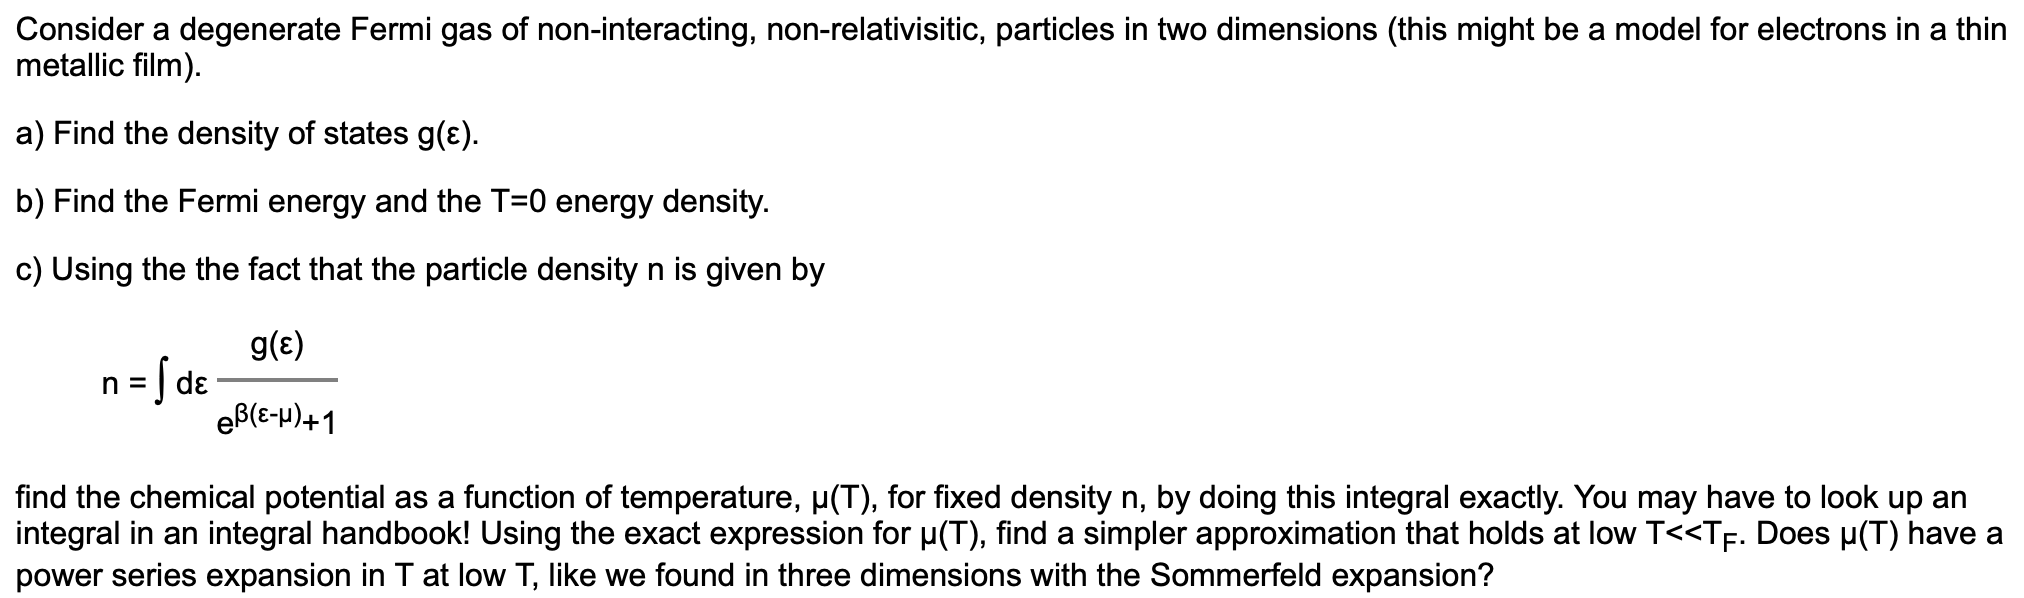 Consider a degenerate Fermi gas of non-interacting, non-relativisitic, particles in two dimensions (this might be a model for electrons in a thin
metallic film).
a) Find the density of states g(ɛ).
b) Find the Fermi energy and the T=0 energy density.
c) Using the the fact that the particle density n is given by
g(E)
] dɛ
eB(E-p)+1
find the chemical potential as a function of temperature, p(T), for fixed density n, by doing this integral exactly. You may have to look up an
integral in an integral handbook! Using the exact expression for µ(T), find a simpler approximation that holds at low T<<TF. Does µ(T) have a
power series expansion in T at low T, like we found in three dimensions with the Sommerfeld expansion?
